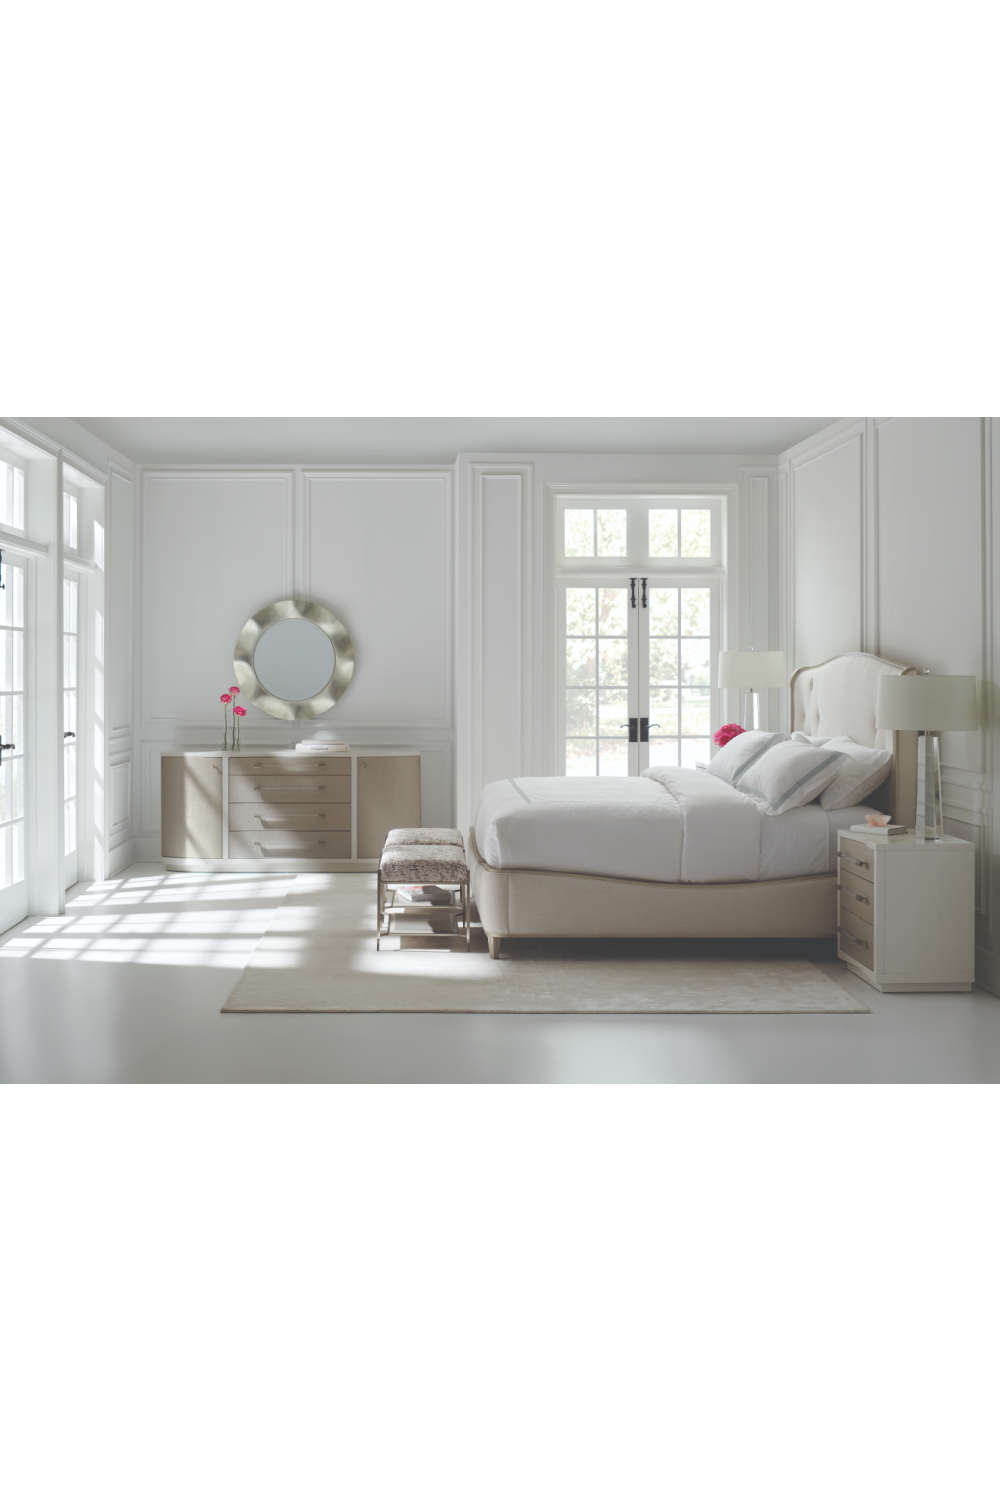 Gray Linen Bed | Caracole Clear The Air | Oroa.com